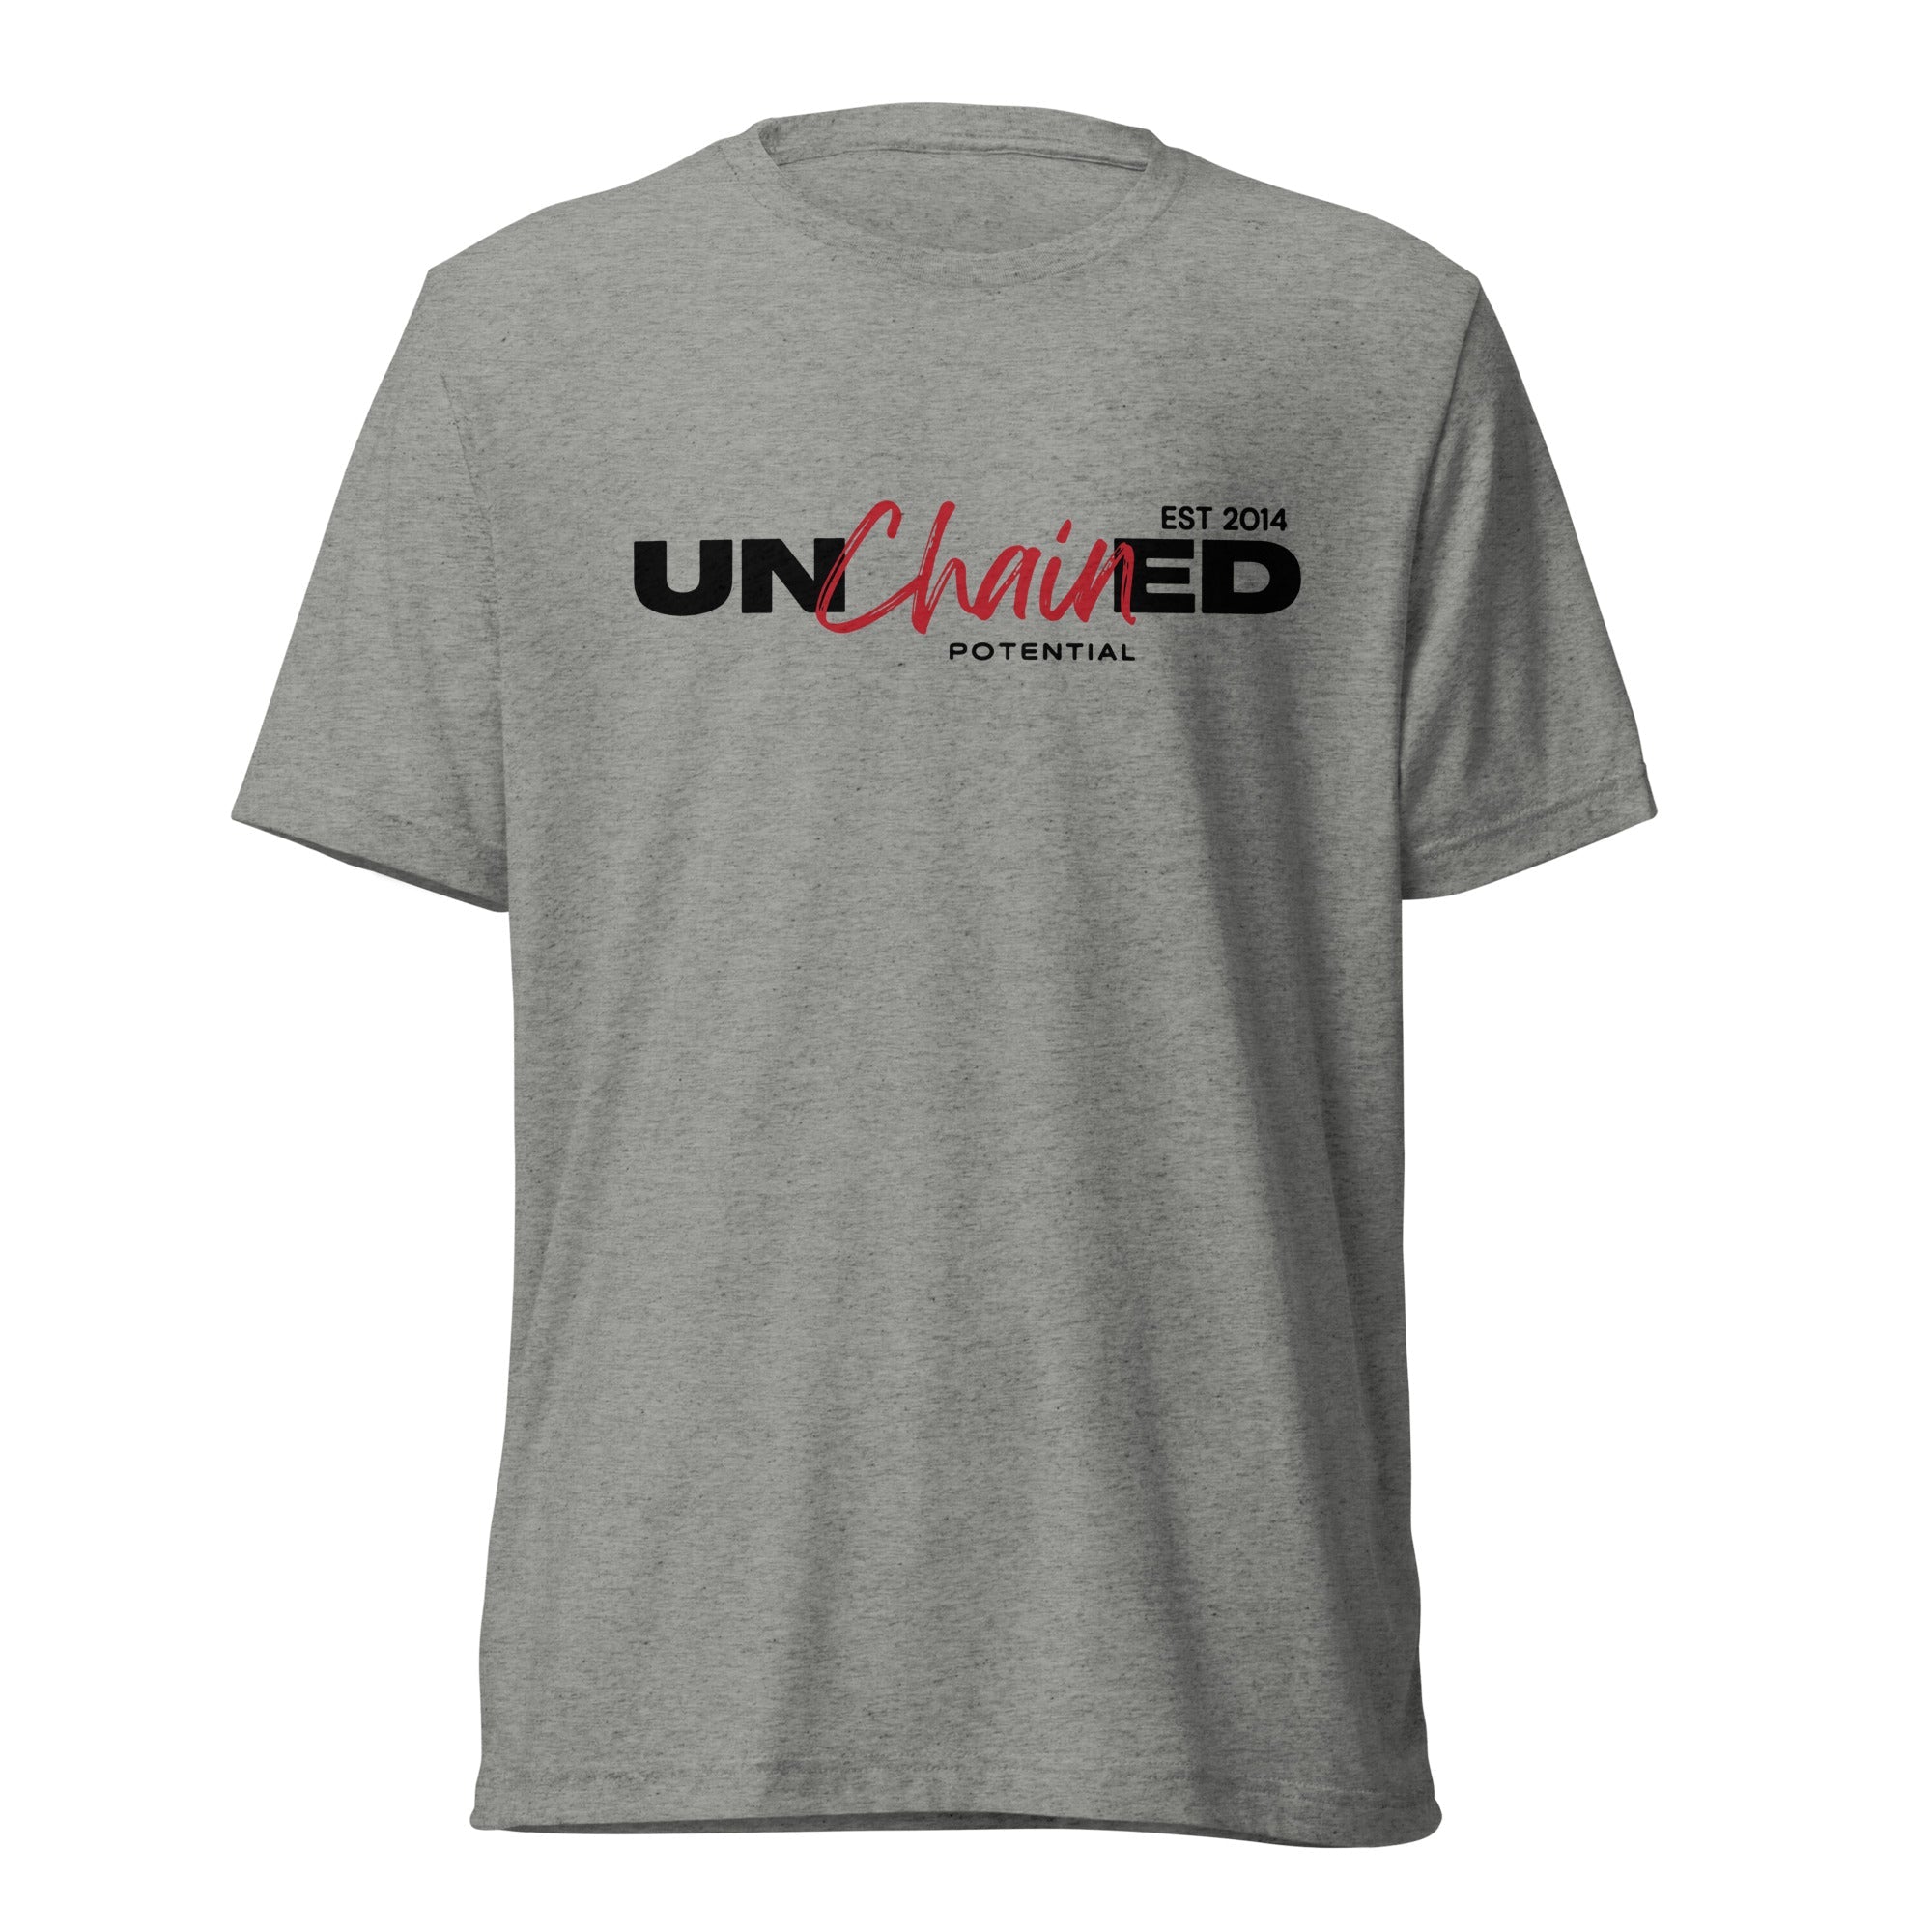 Unchained Potential Short sleeve t-shirt v2